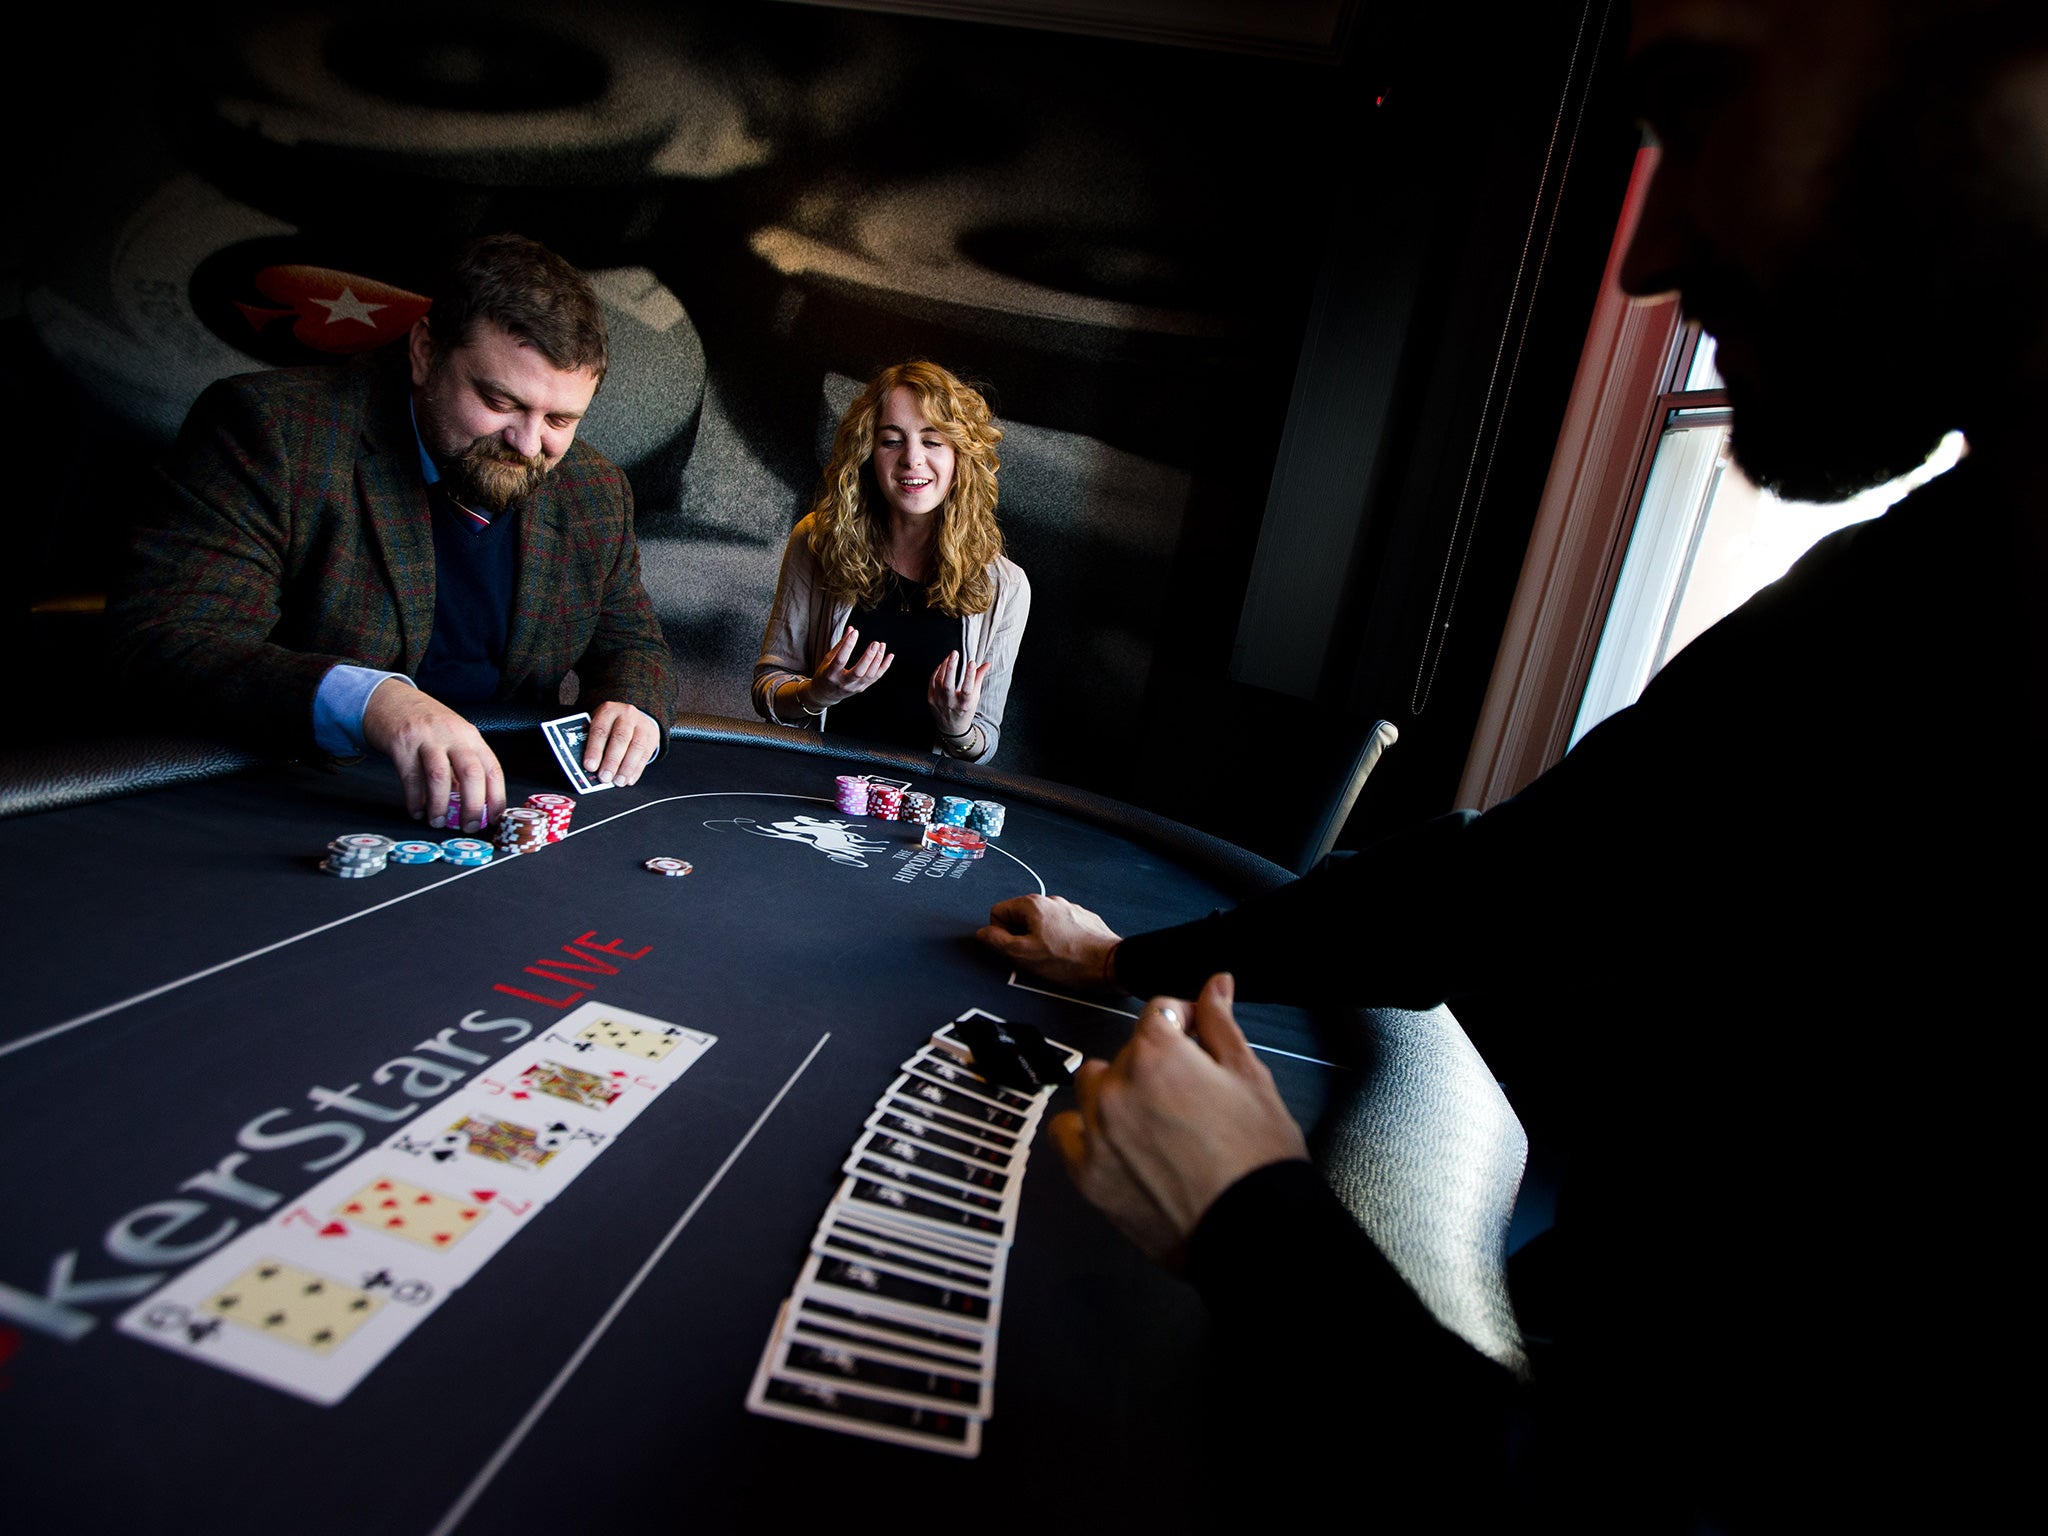 Rachael Pells plays poker at the Hippodrome Casino in Leicester Square